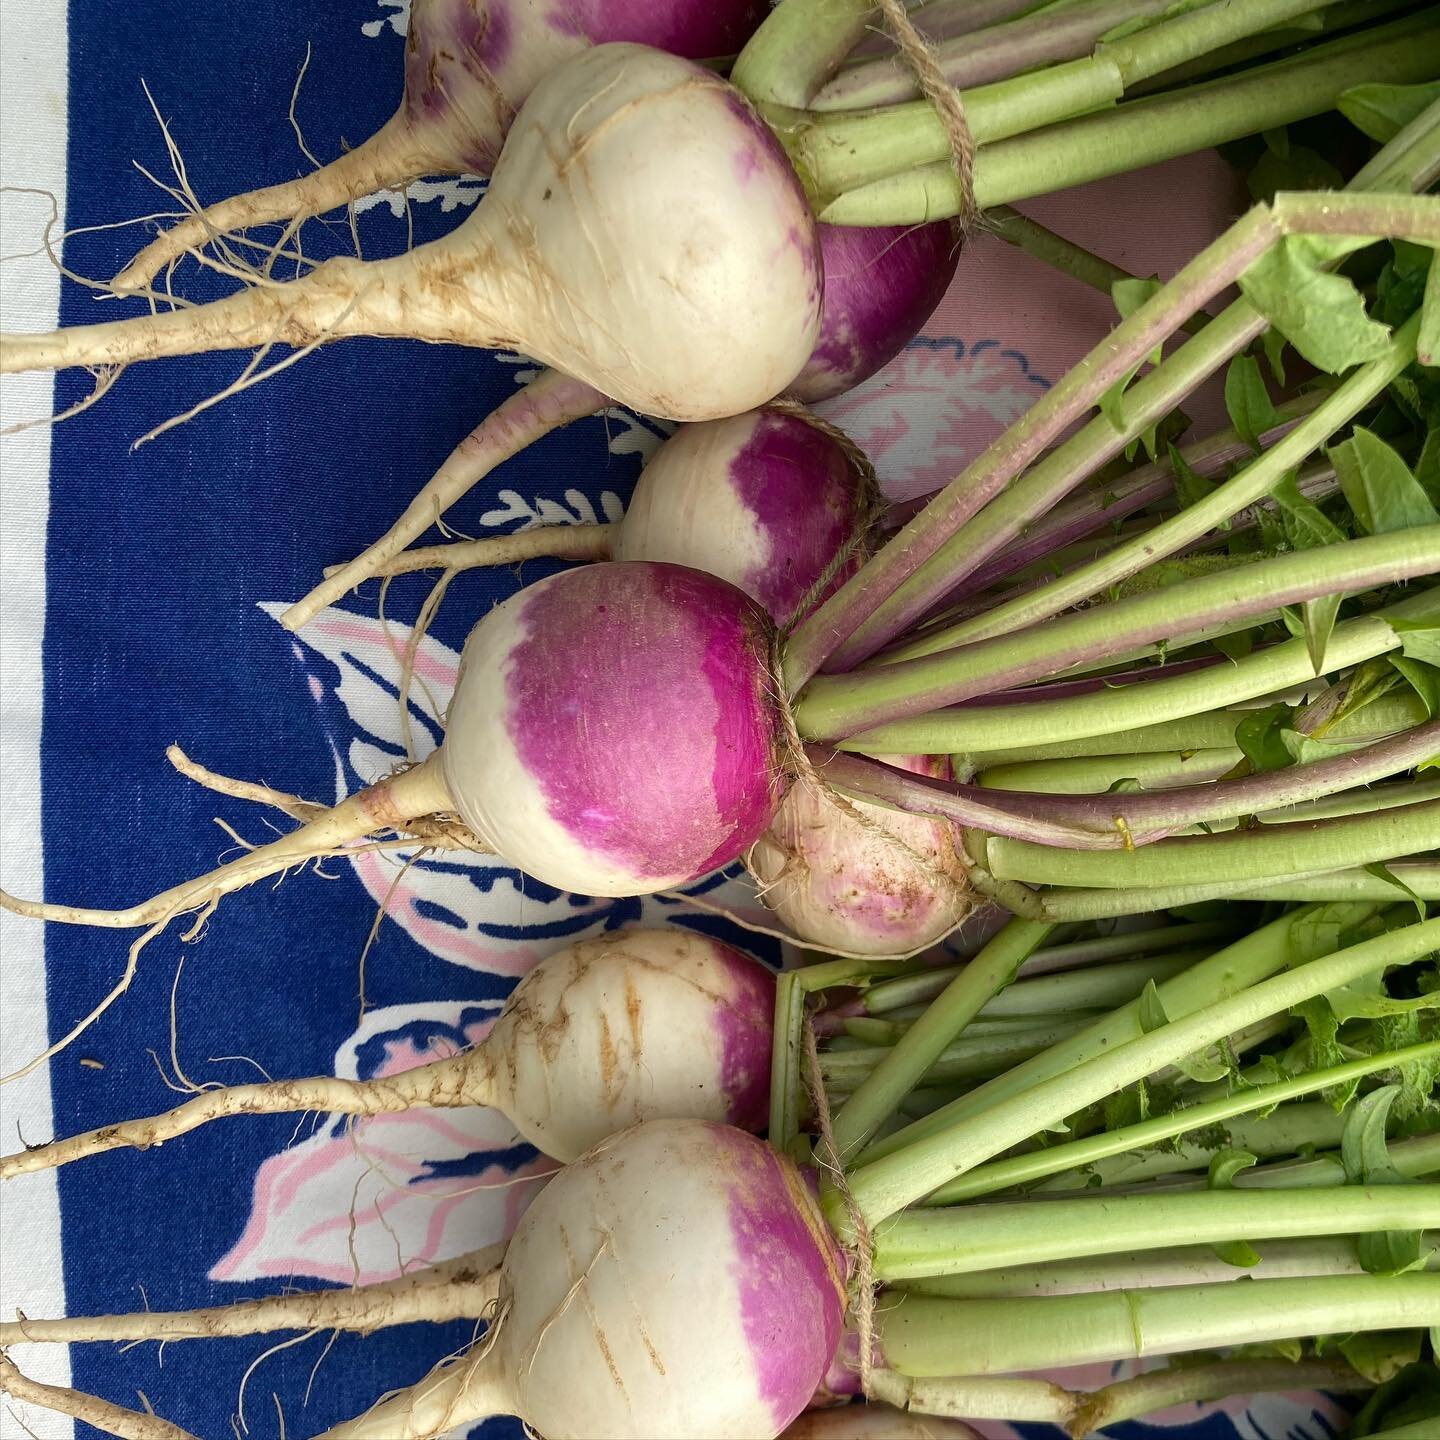 Cool season crops are back! (Whether you&rsquo;re ready for them or not). Stop by to get some beets and turnips and get ur roast on 🤙